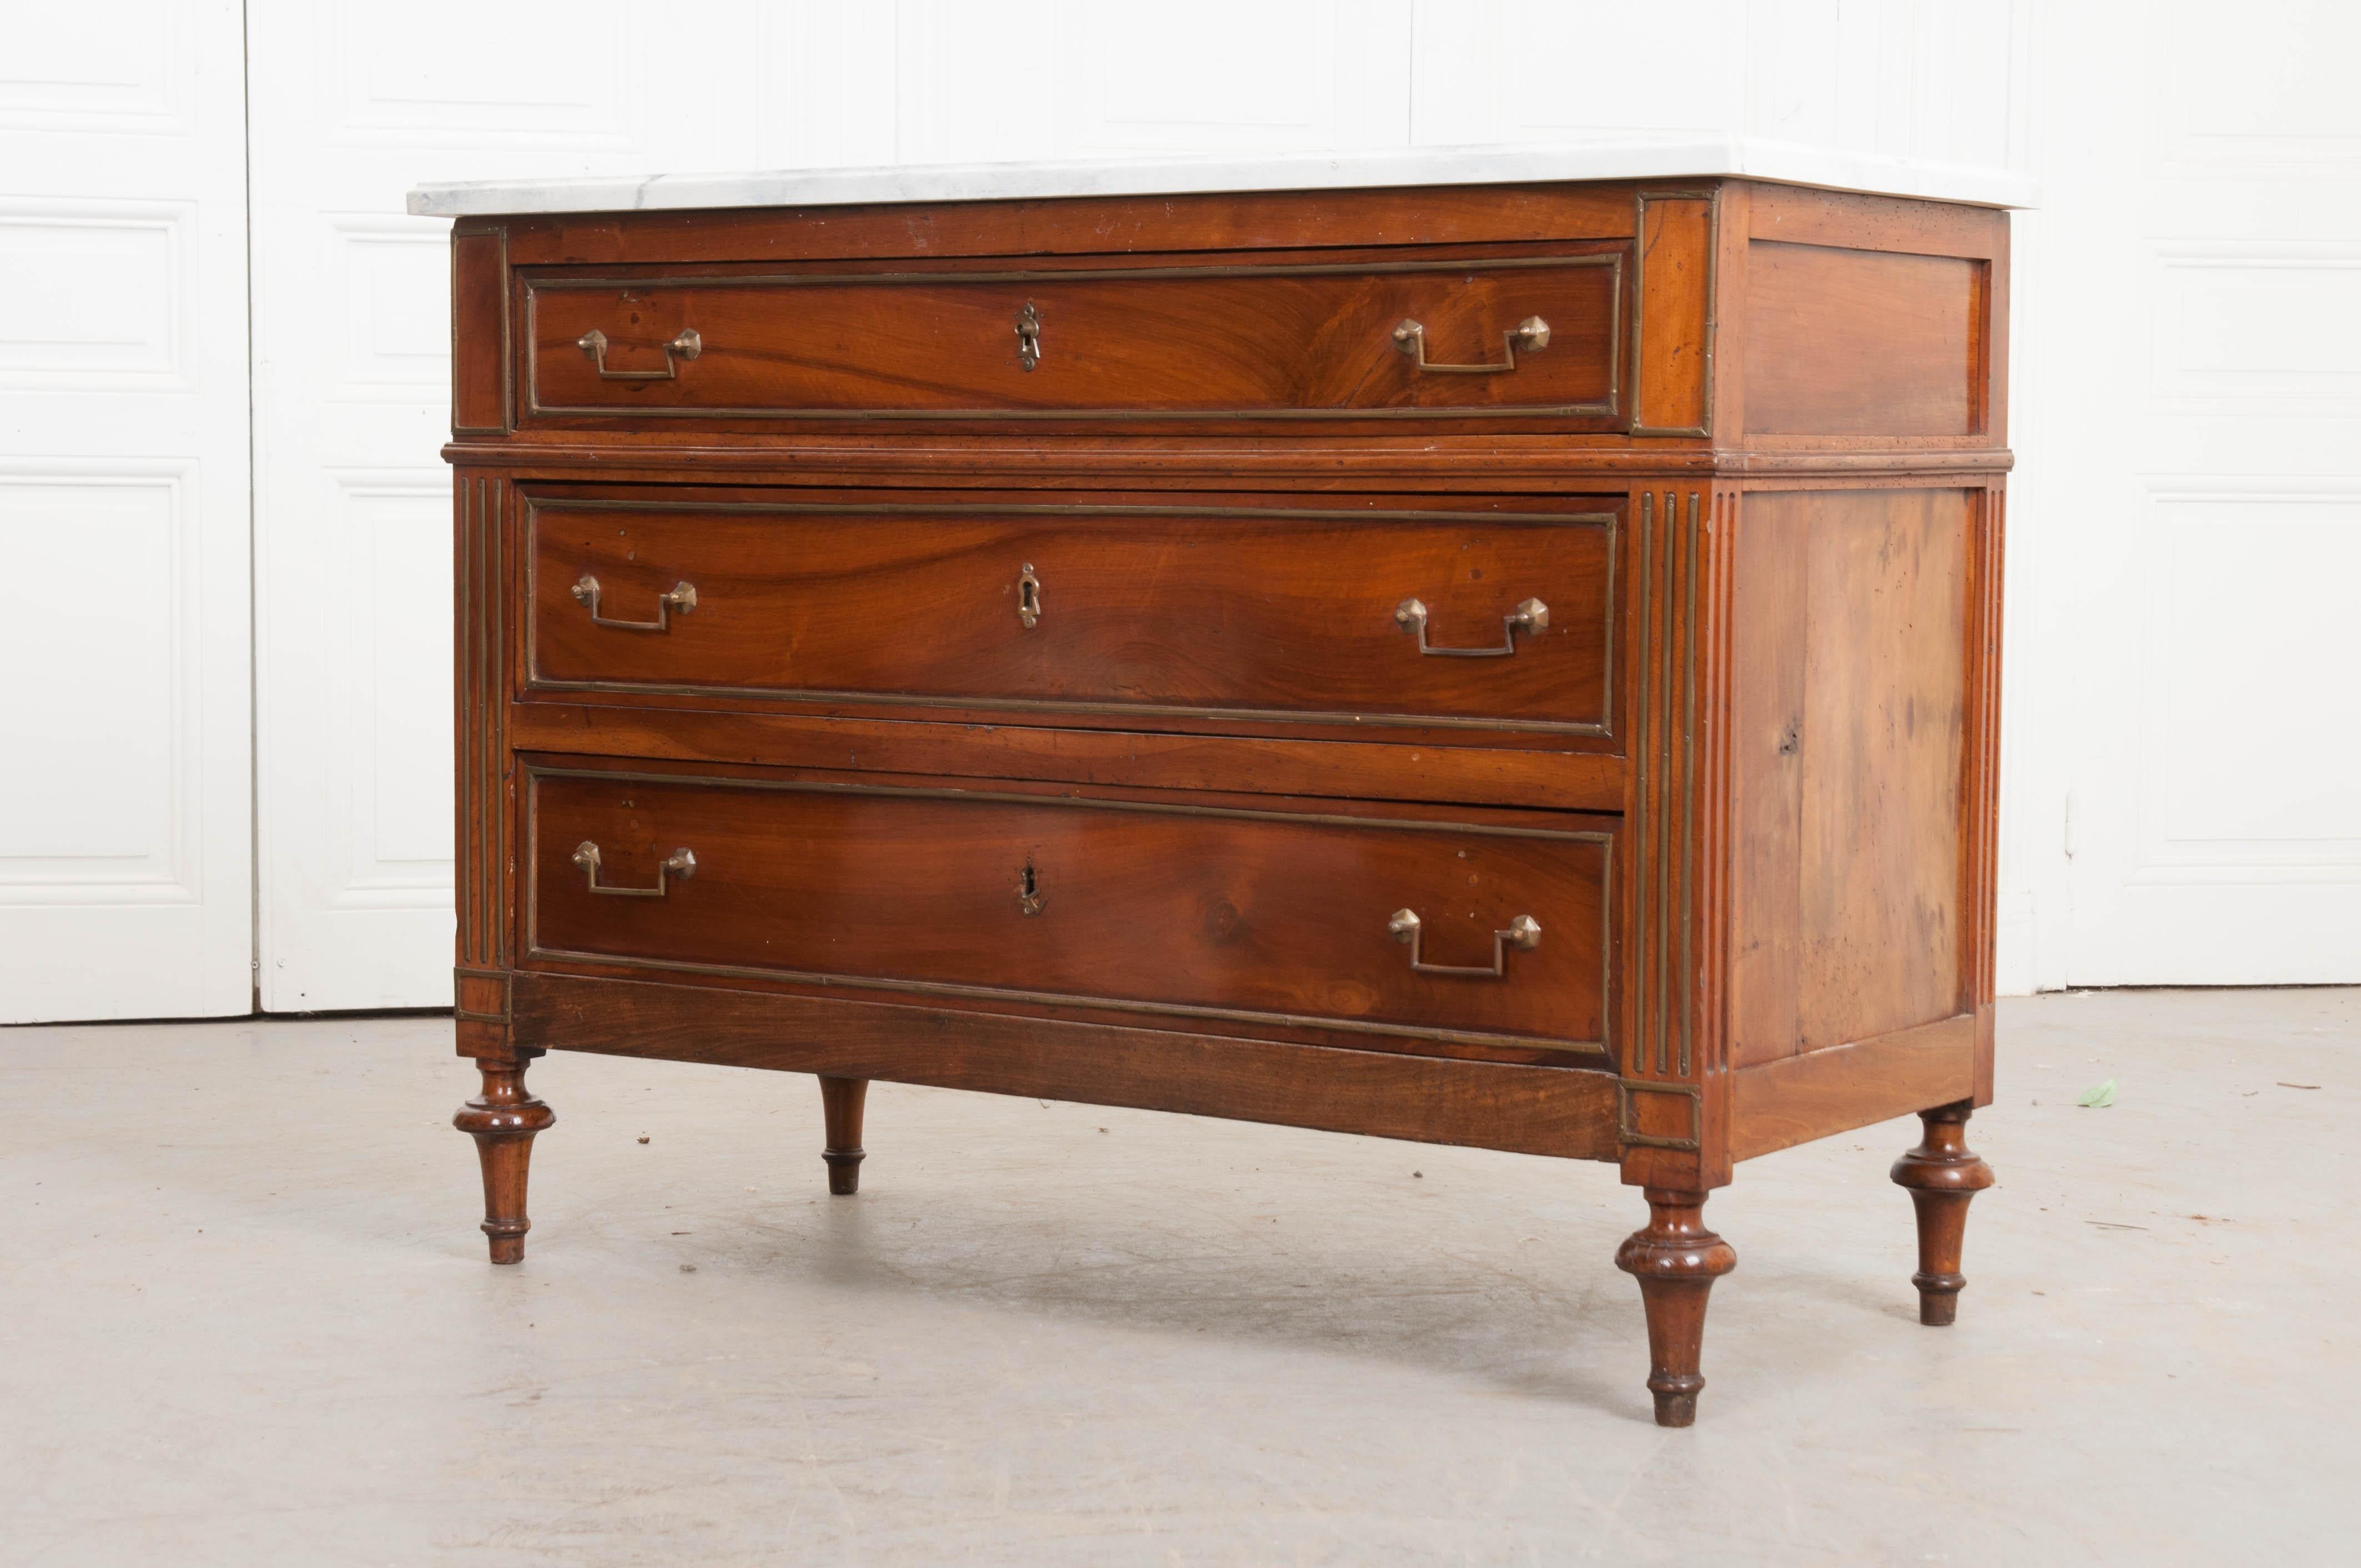 This Louis XVI-style walnut commode with white faux marble top, circa 1890, is from France. It features three drawers, the fronts of which are trimmed with brass and have brass-pull handles and escutcheons, flanked by fluted pilasters and raised on